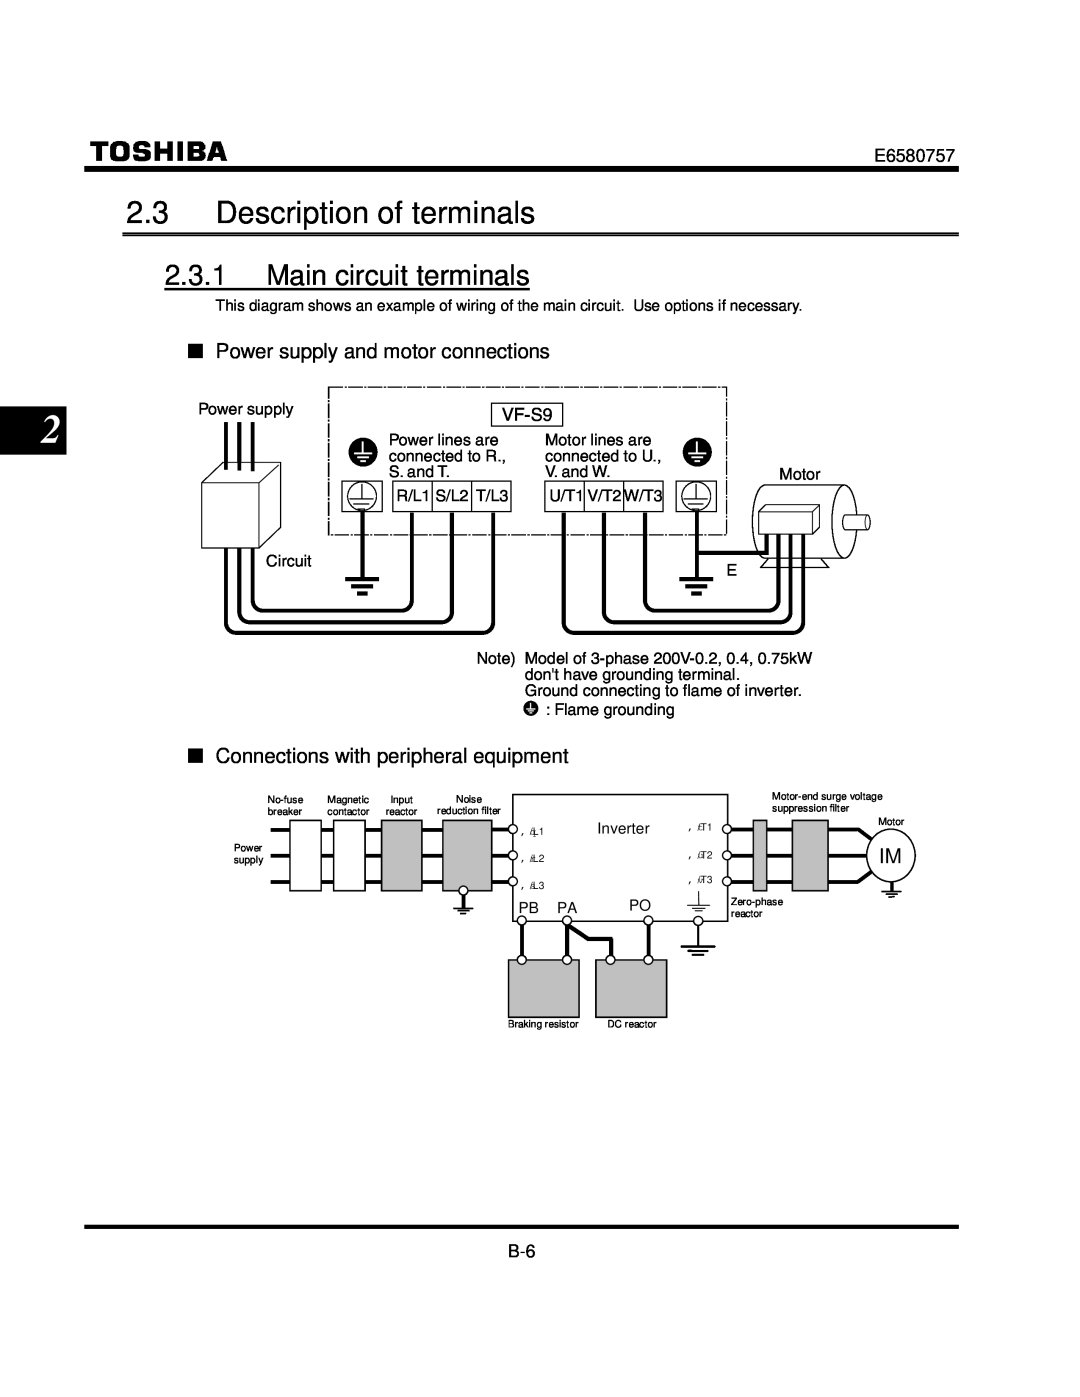 Toshiba VF-S9 manual Description of terminals, Main circuit terminals, Power supply and motor connections 